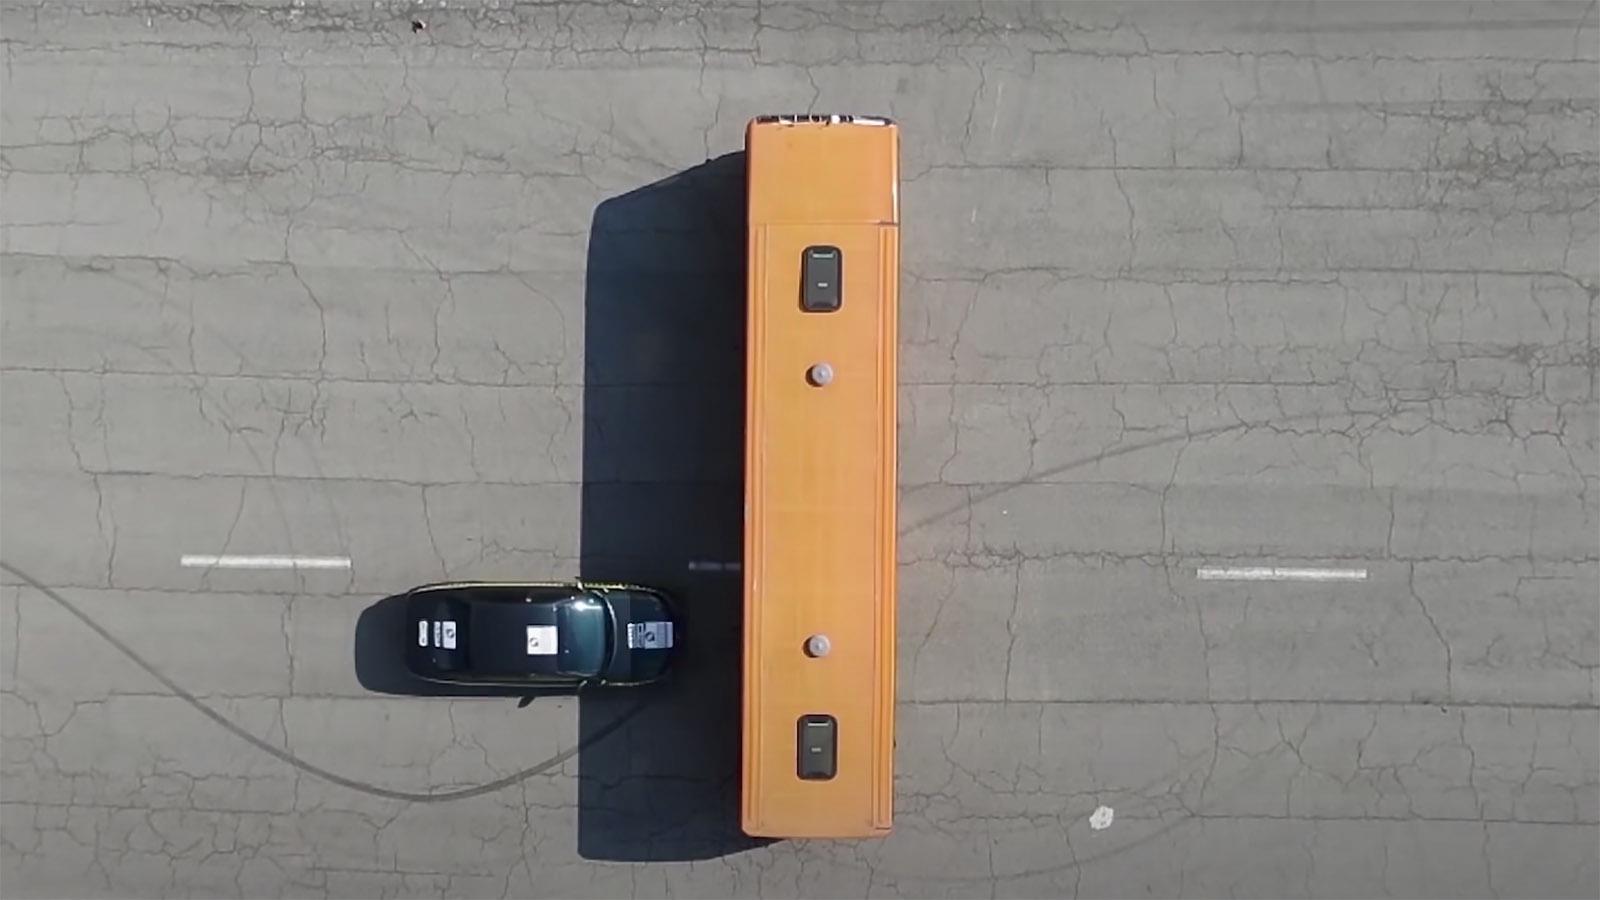 Bus and car crash test aerial view